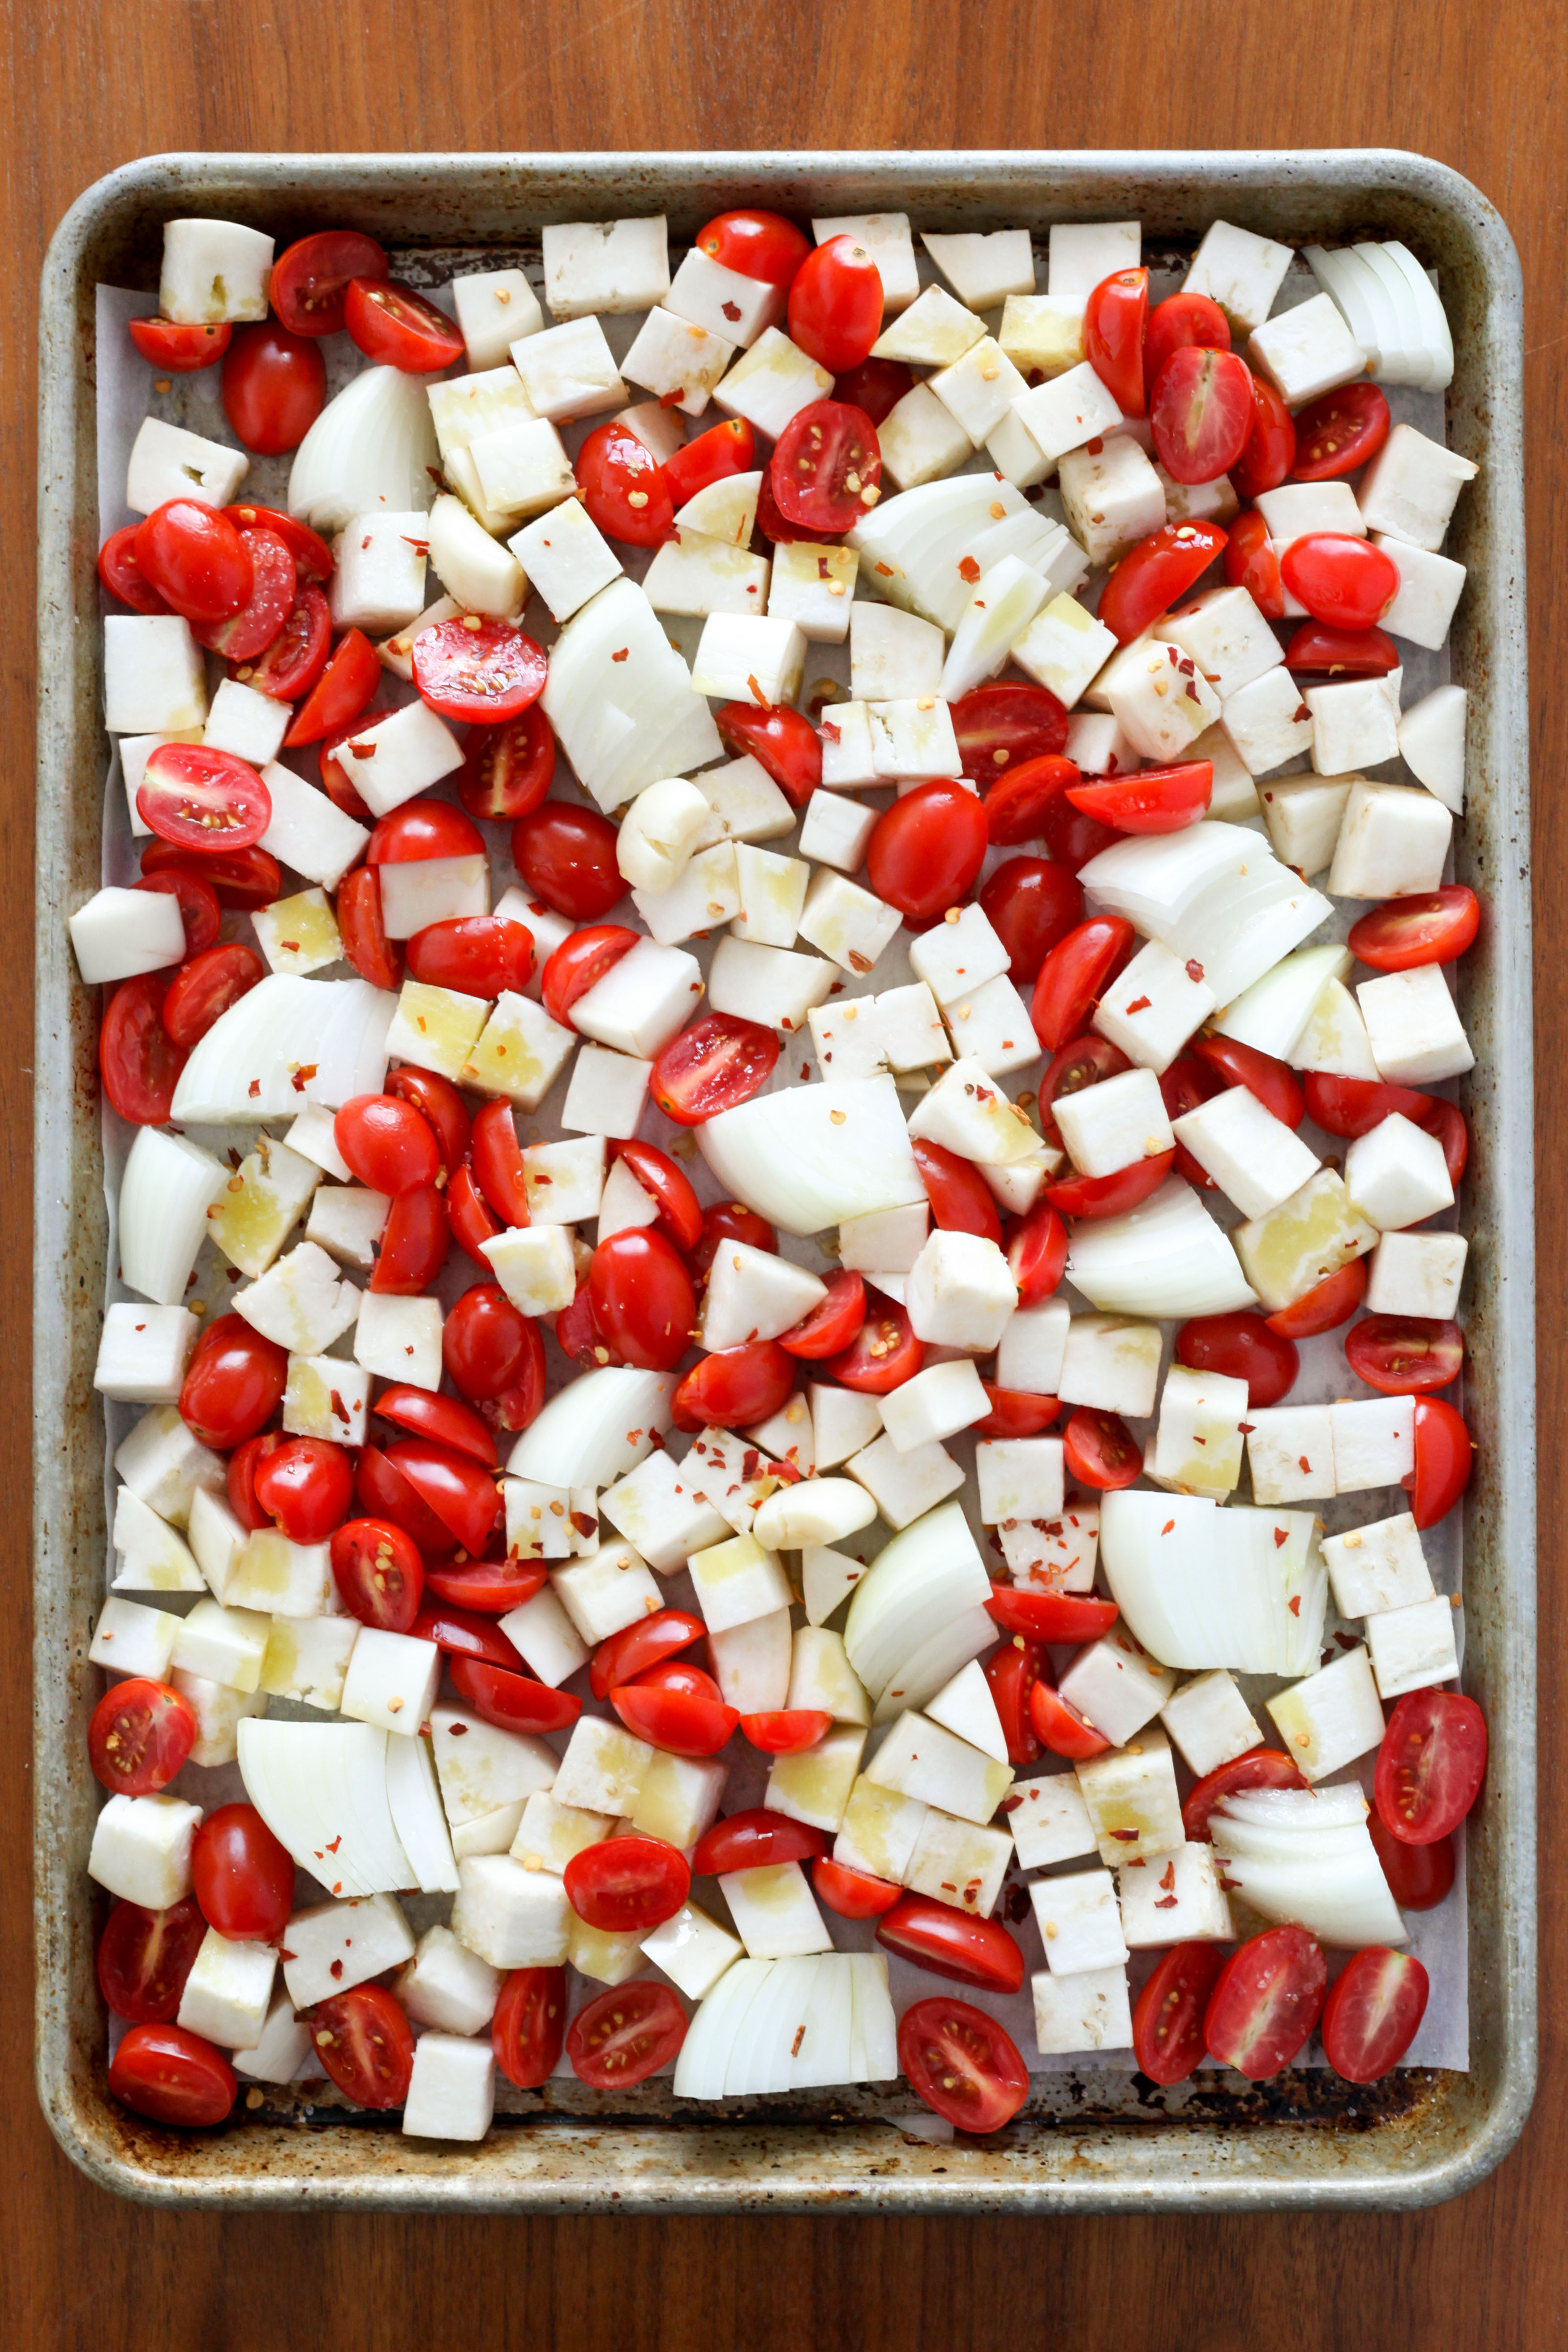 Vegetables ready to roast